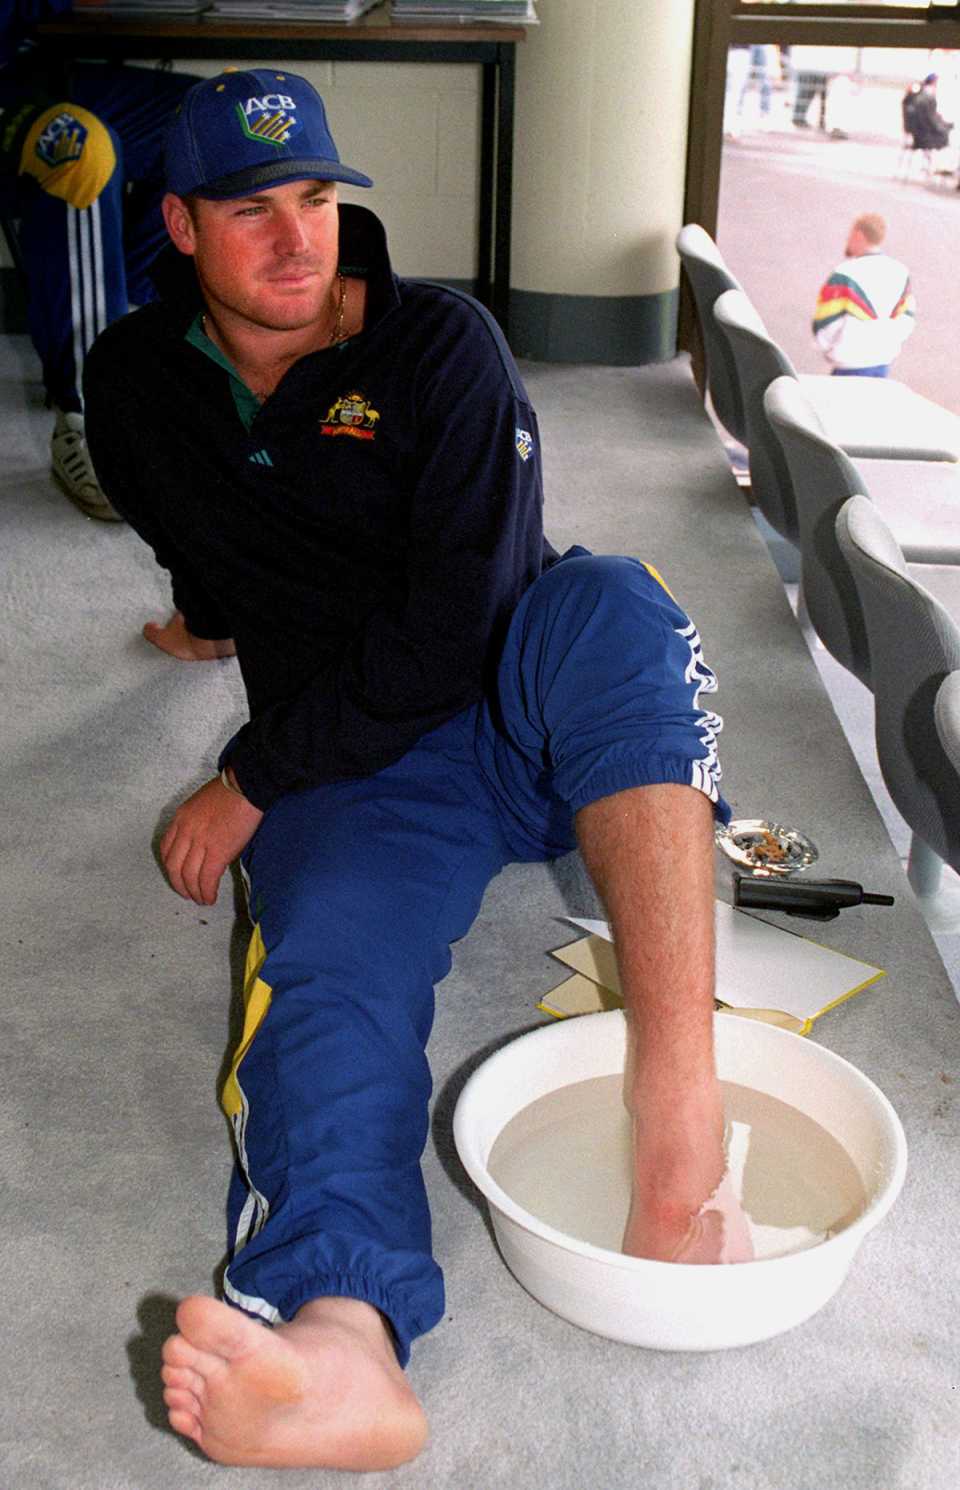 Shane Warne soaks his foot in a tub of water after receiving a cracked toe while batting